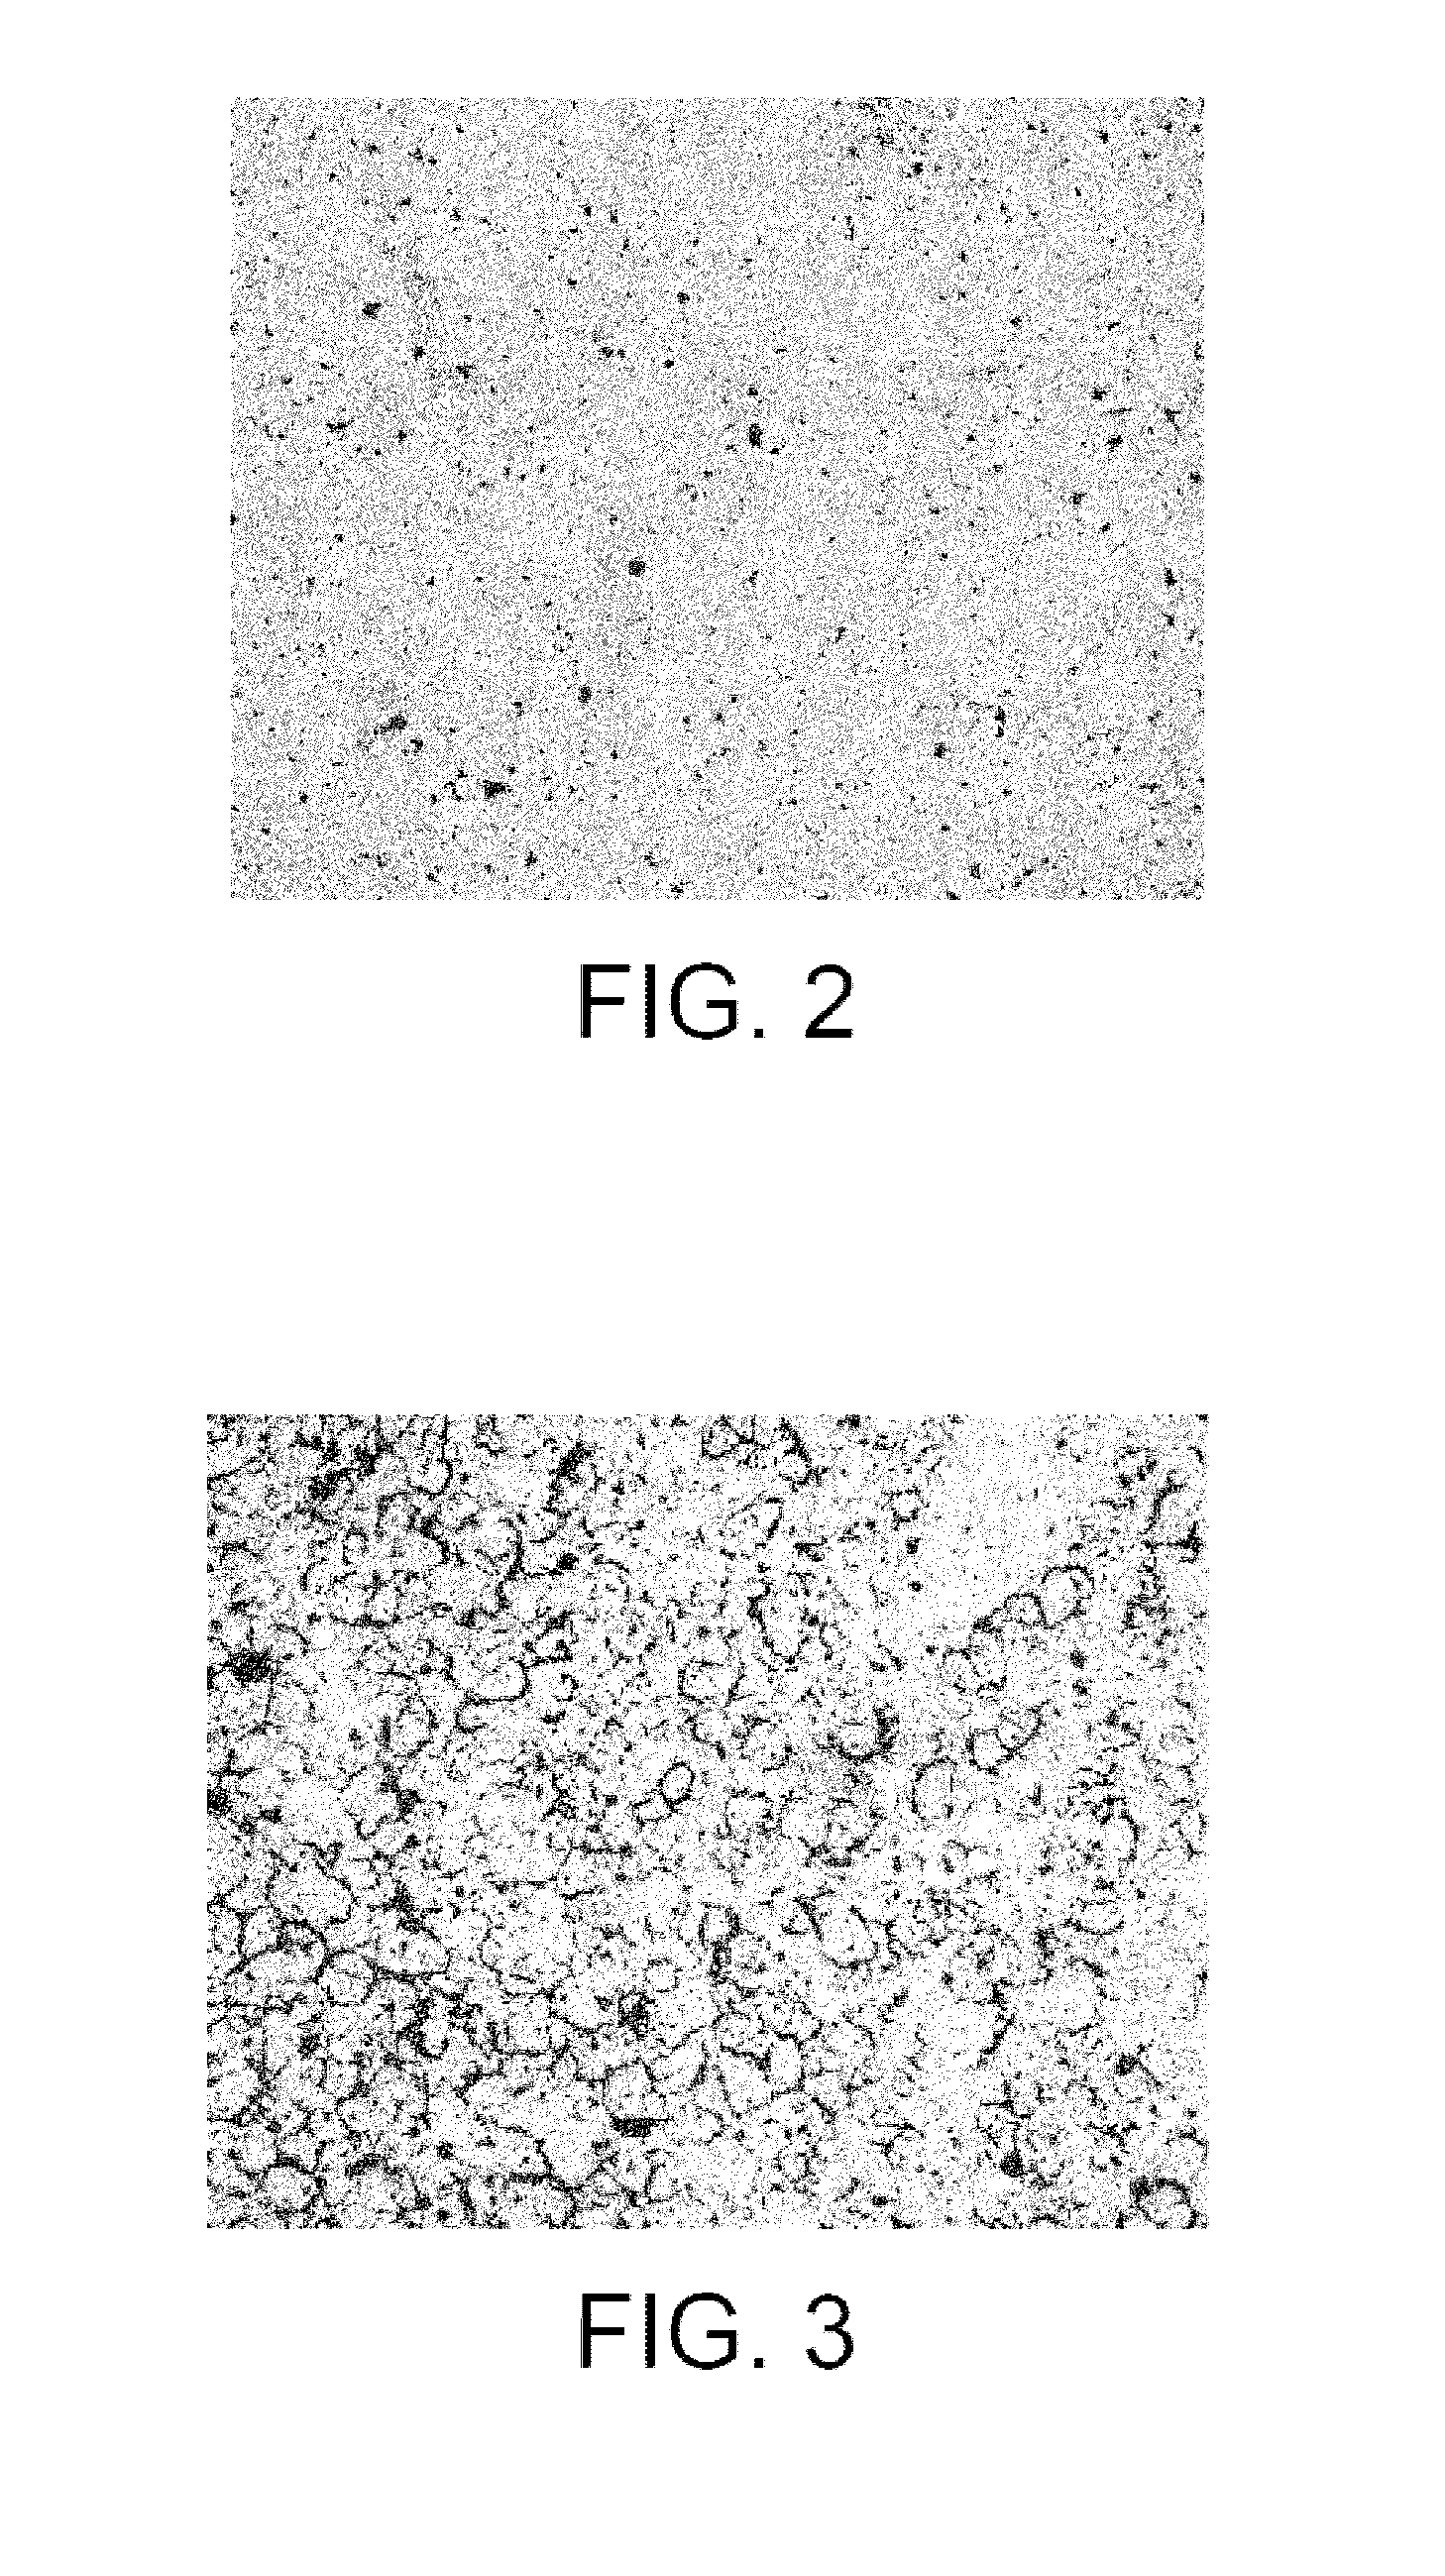 Method for preparing a porous nuclear fuel based on at least one minor actinide